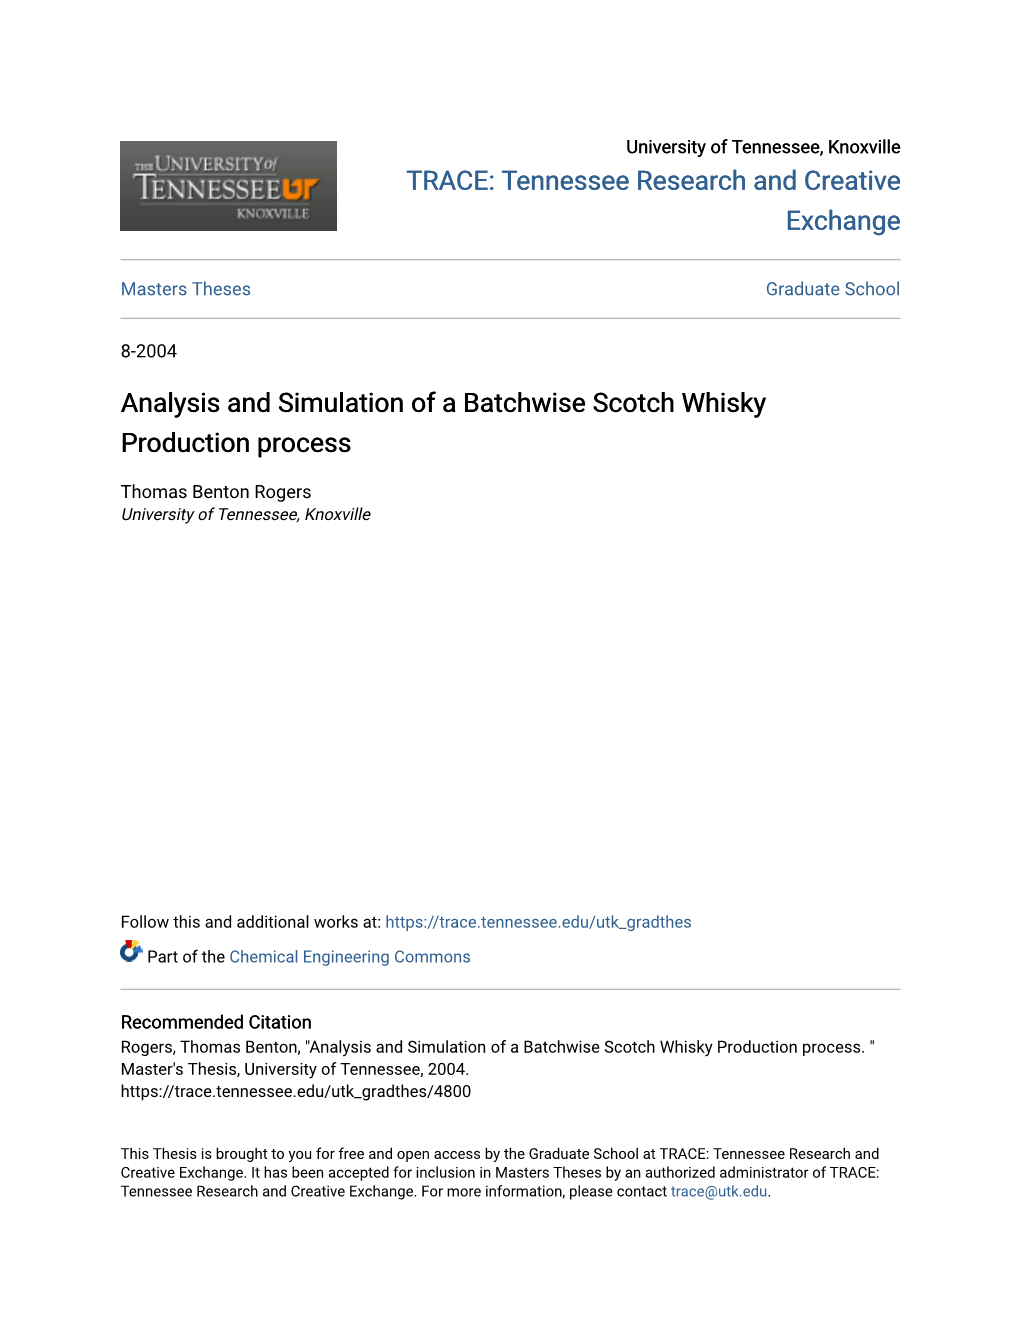 Analysis and Simulation of a Batchwise Scotch Whisky Production Process